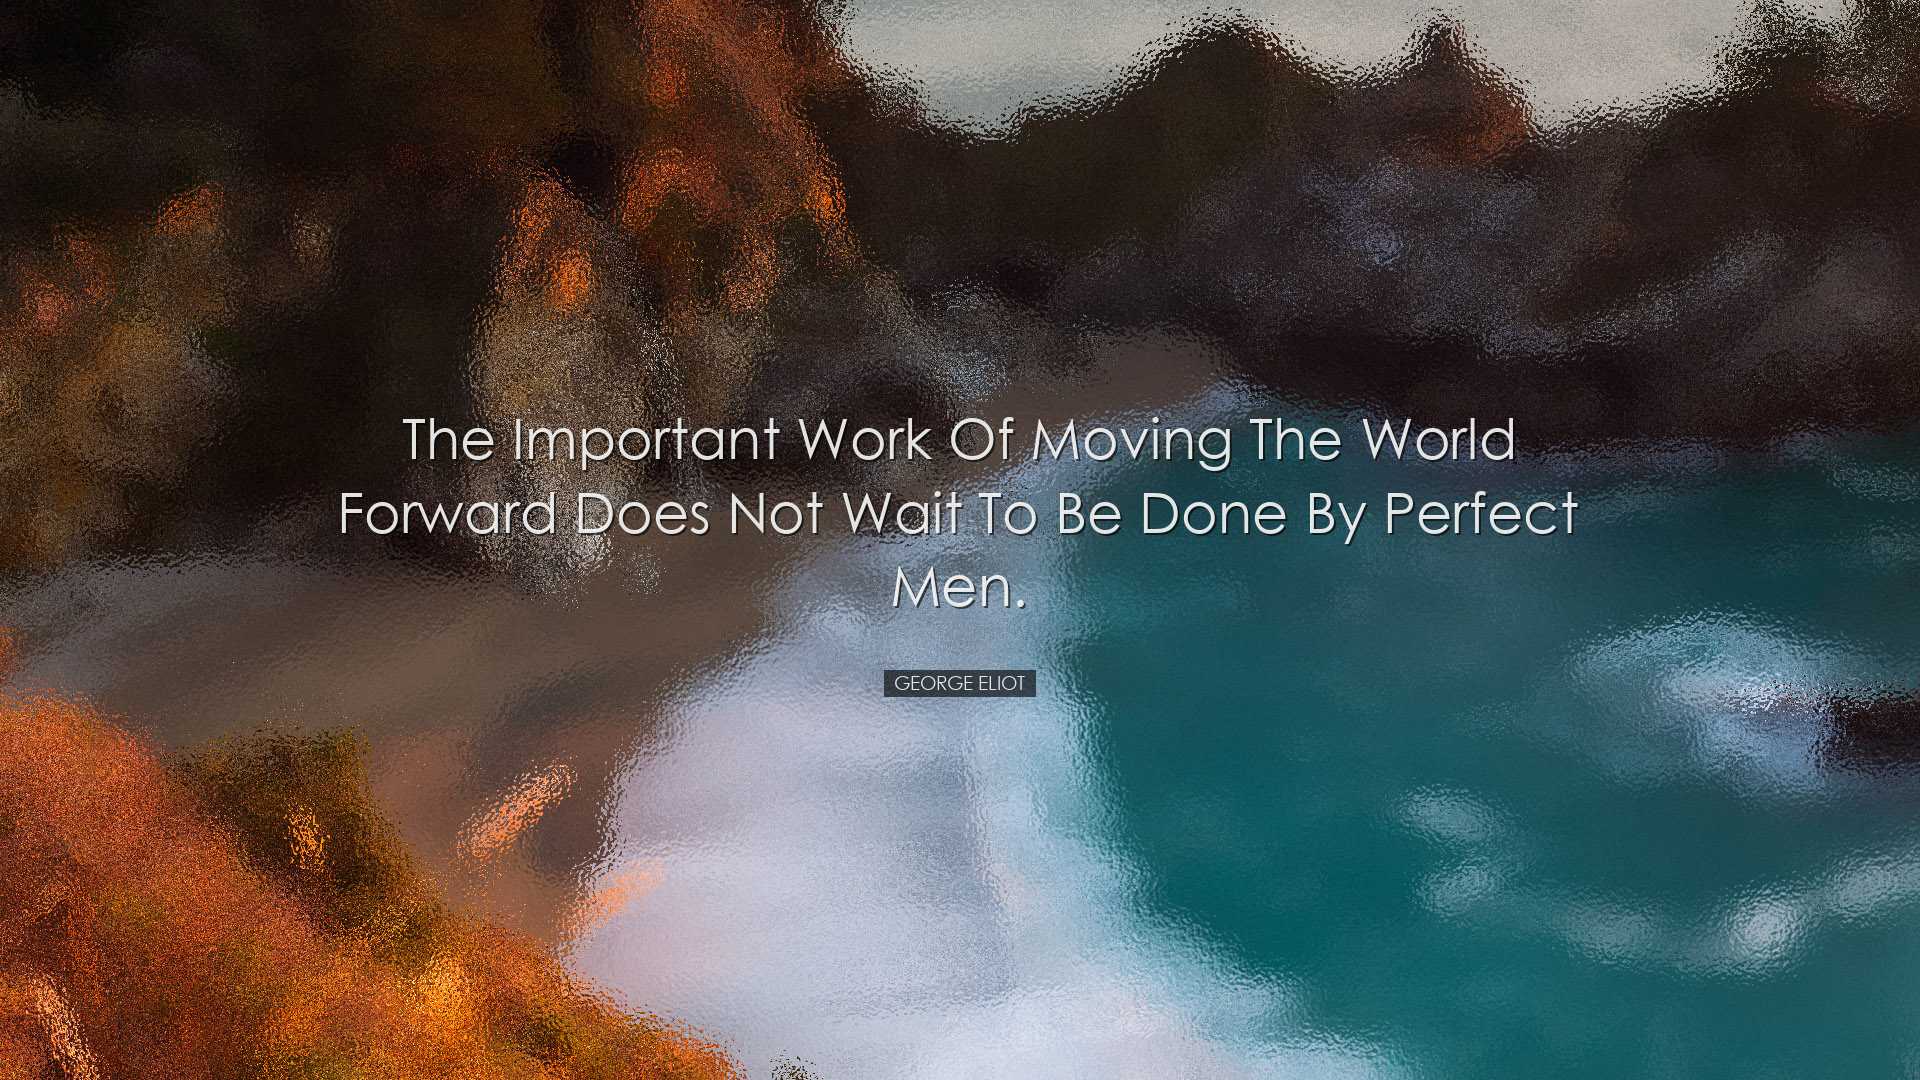 The important work of moving the world forward does not wait to be